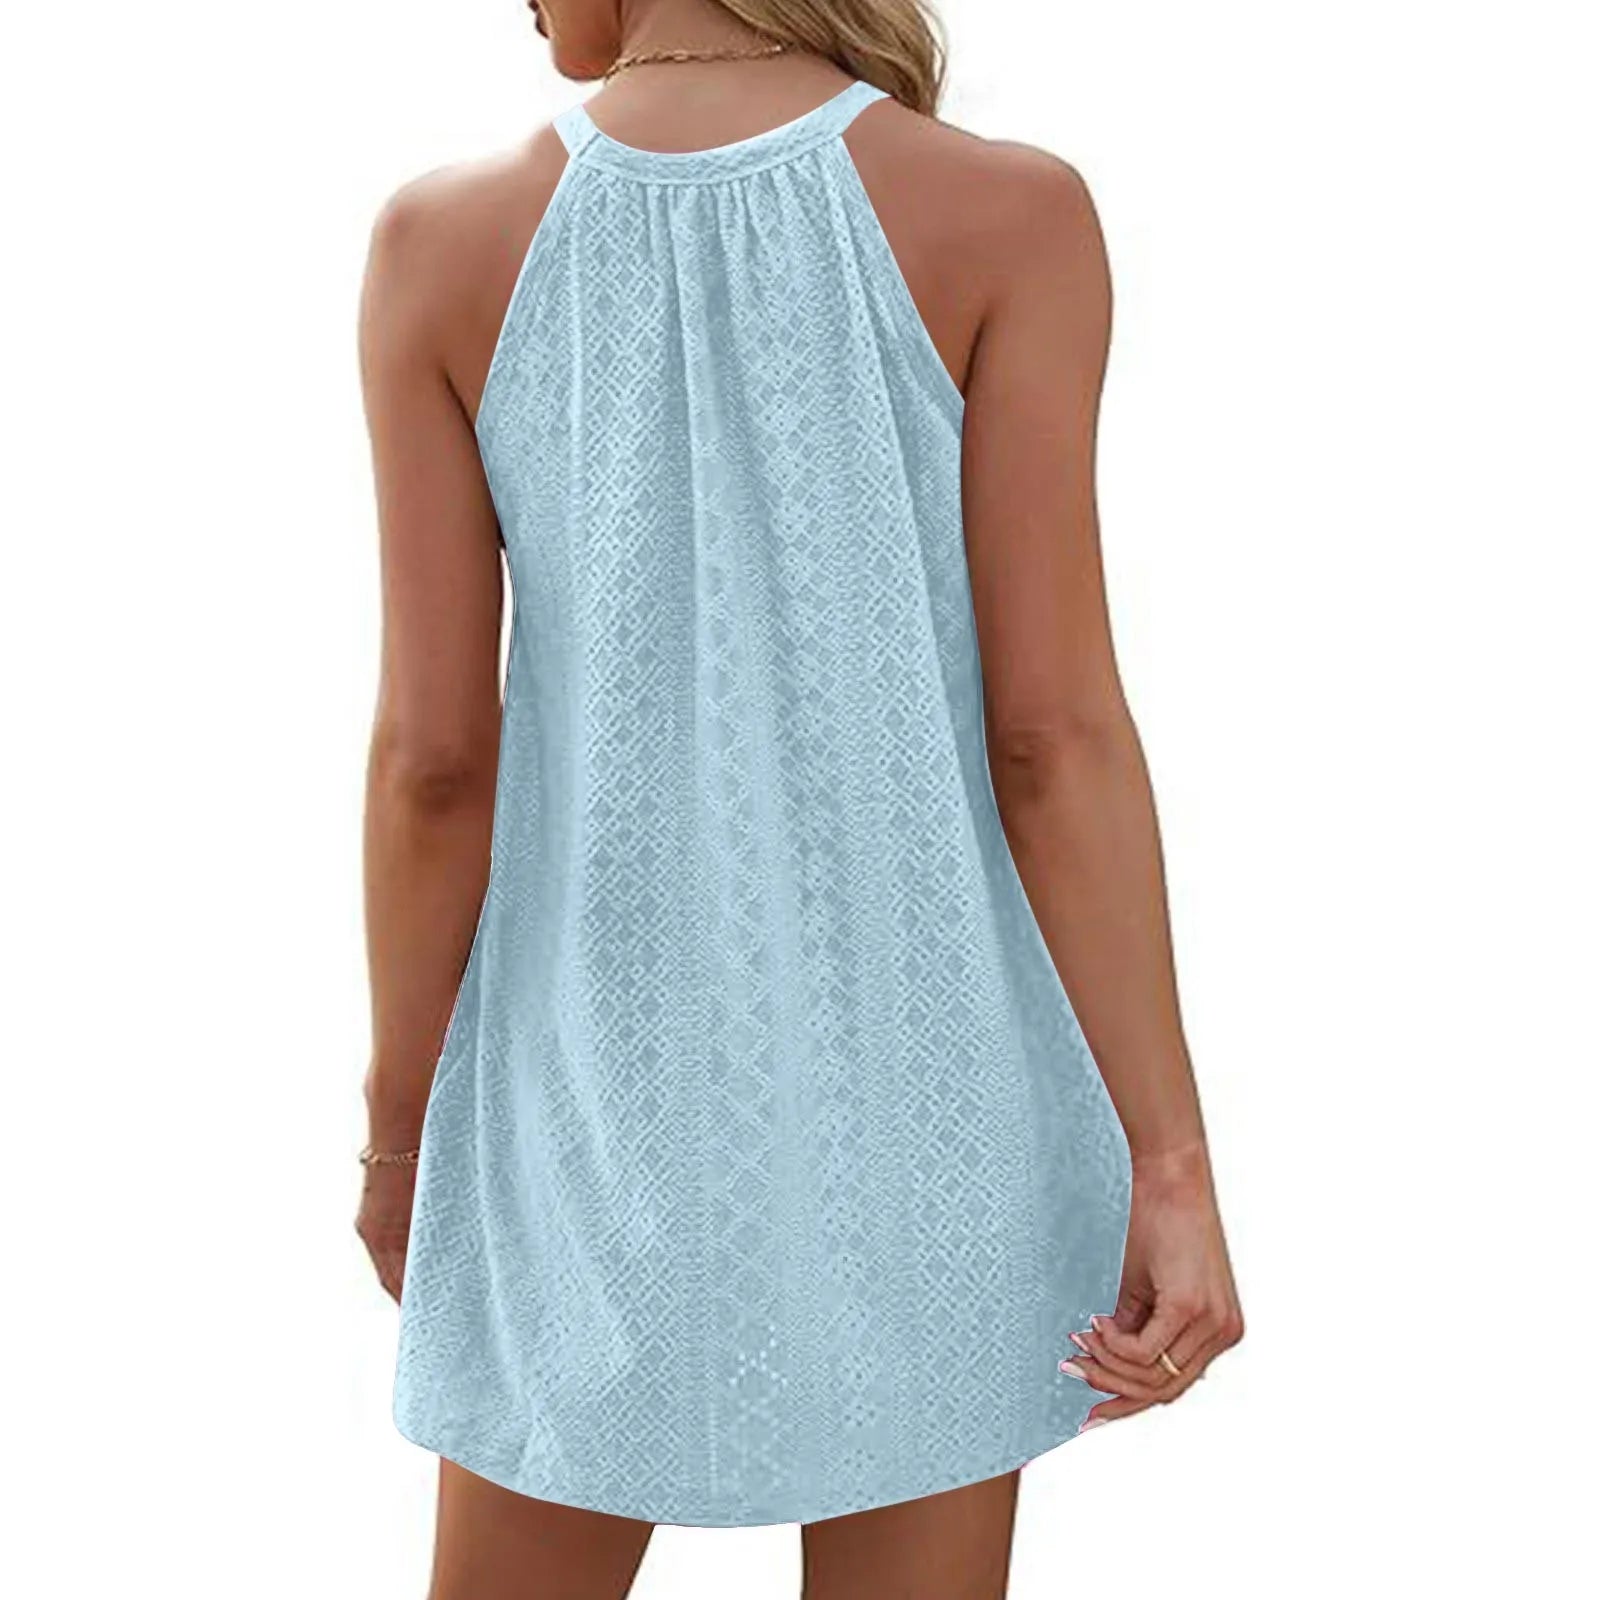 Crochet Hollow Out Summer Dresses For Women Swimsuit Beach Cover Up Skirt Solid Color Sleeveless Tank Dress Casual Loose Tops LUXLIFE BRANDS